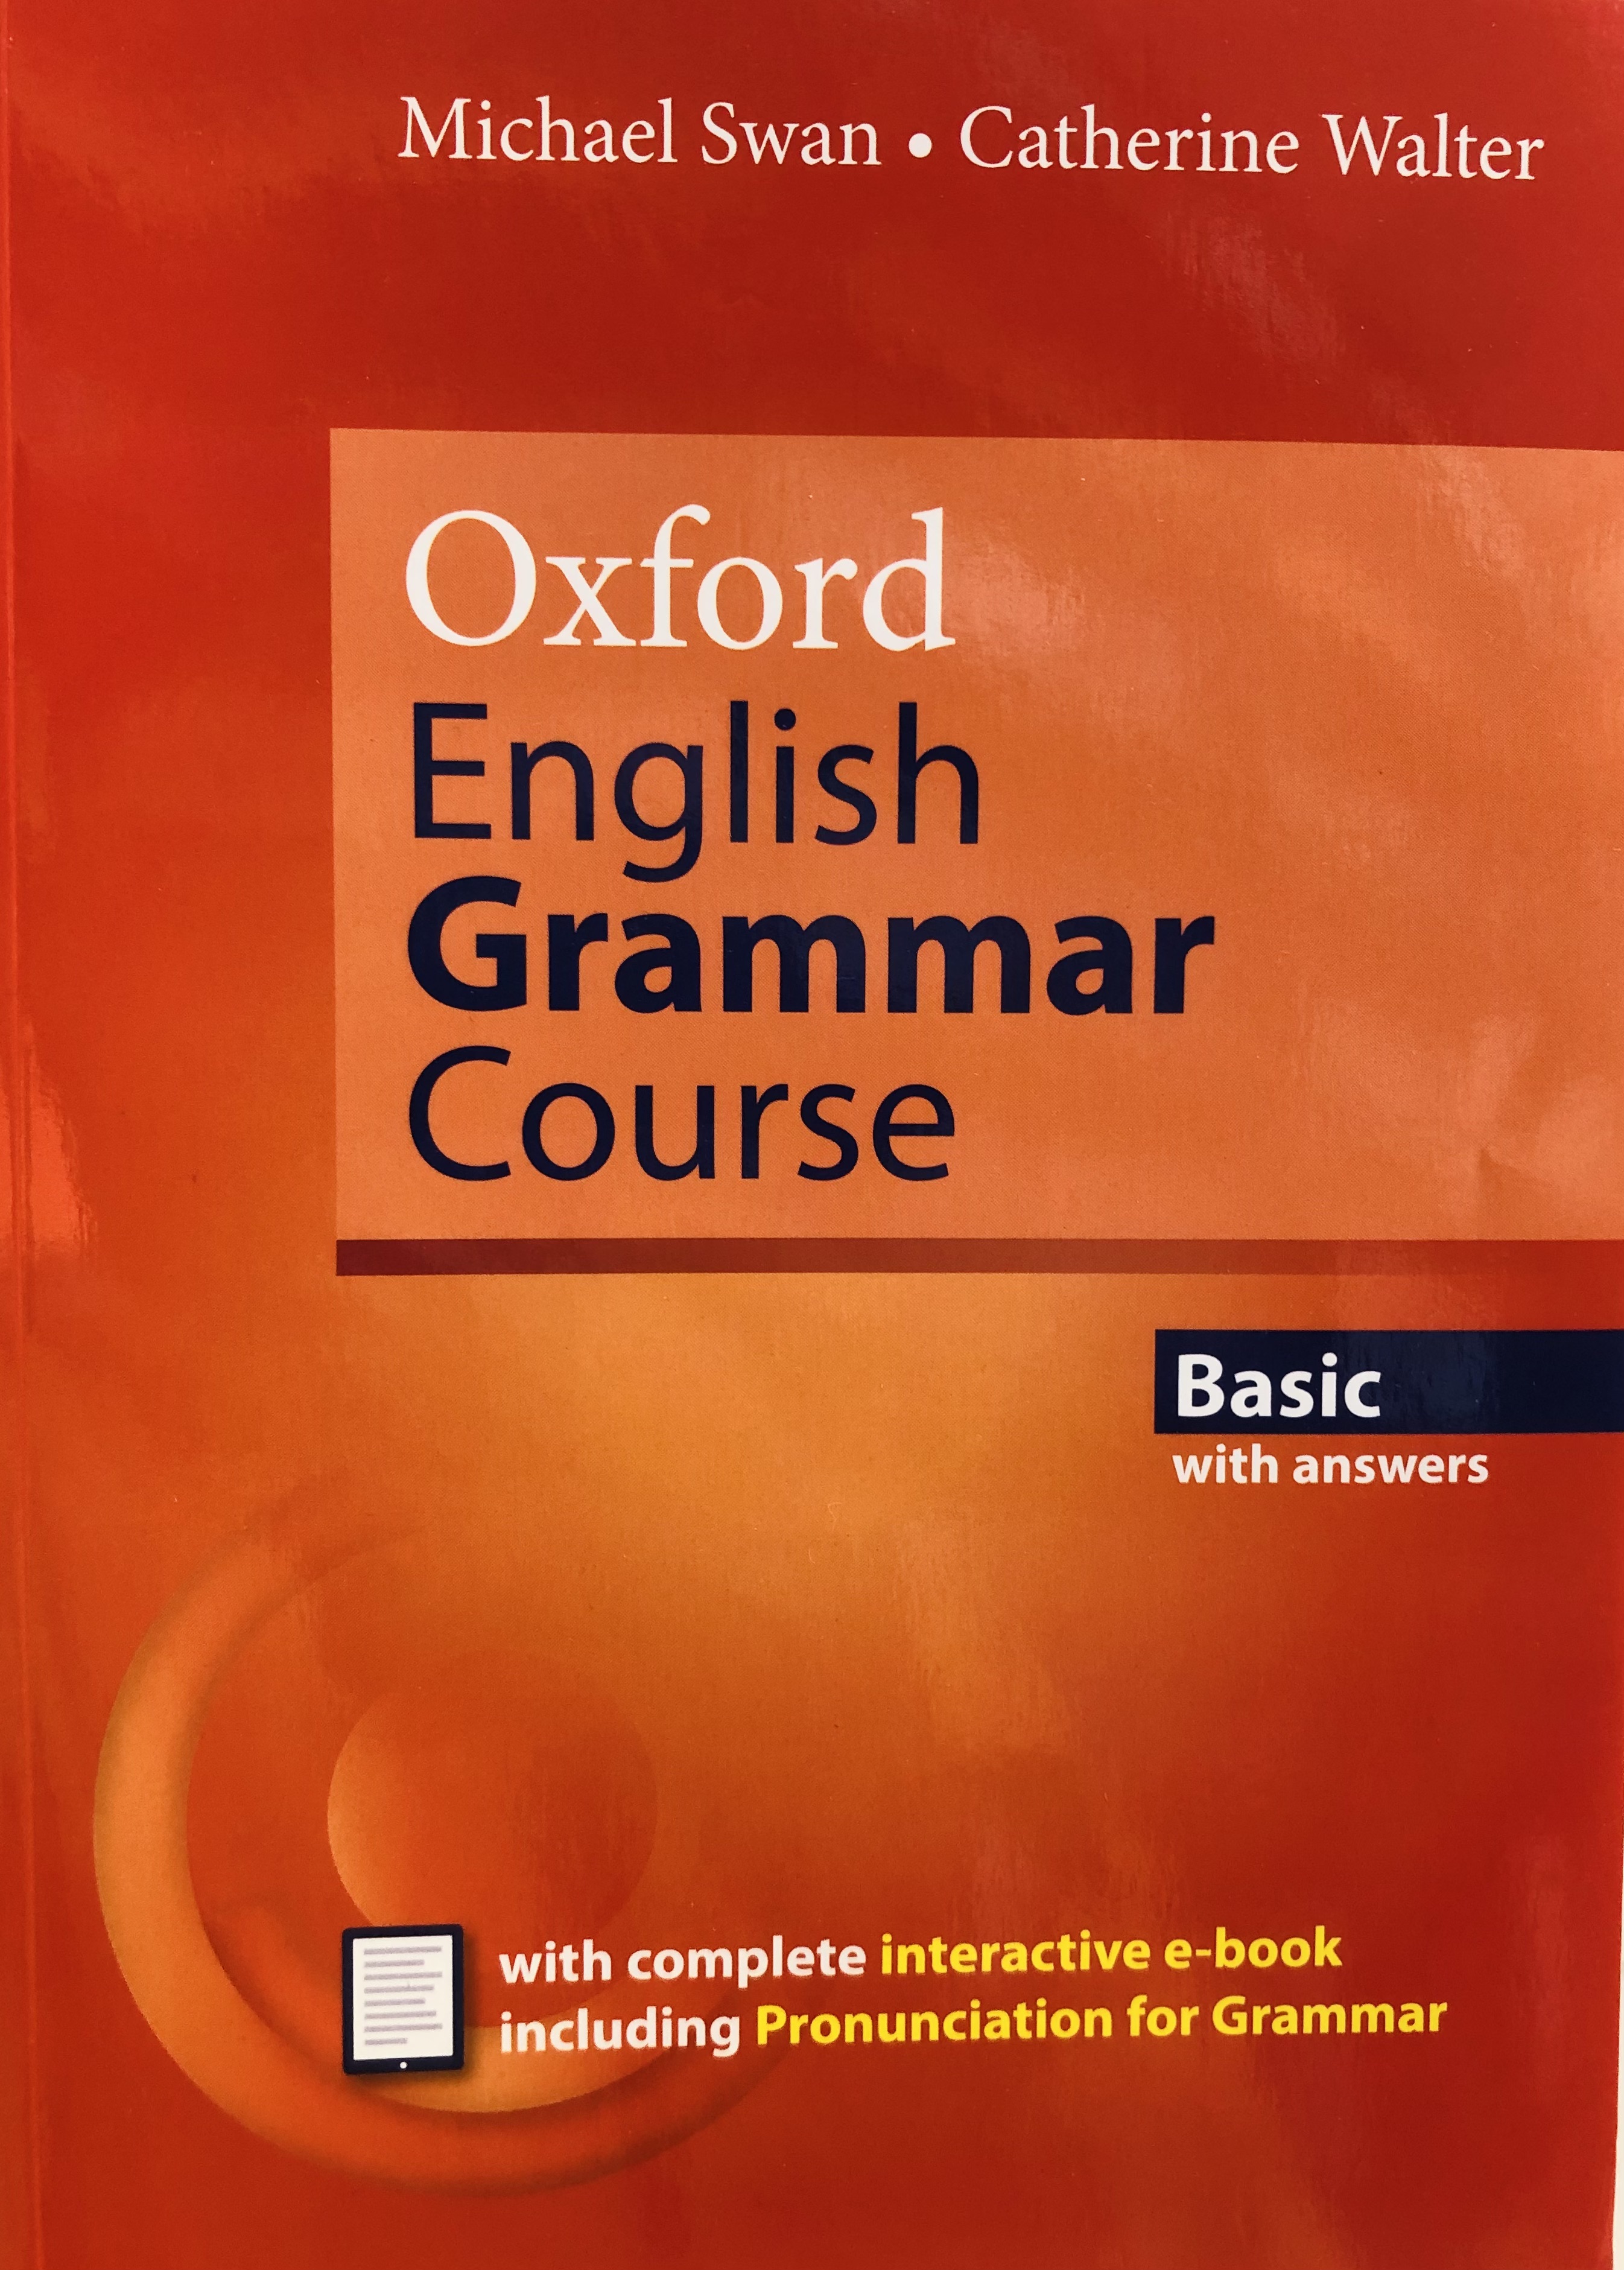 Oxford English Grammar Course with answers [access code for e-book